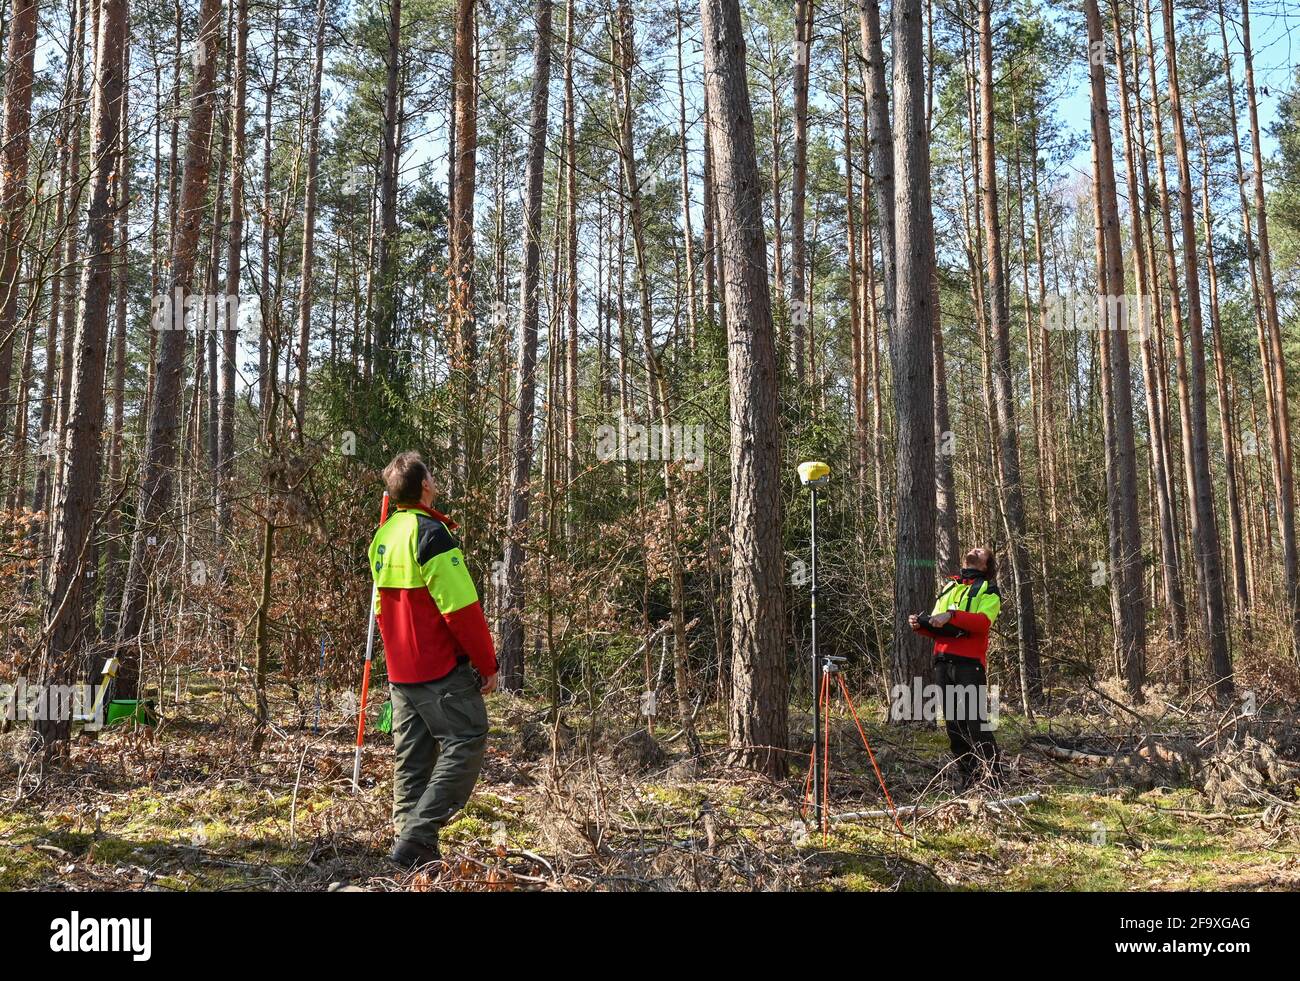 21 April 2021, Brandenburg, Eberswalde: Jochen Ernst (l) and Harry Zippel, both forest surveyors at the Brandenburg State Forestry Office, survey a site in the forest for the Federal Forest Inventory. On the same day, the official starting signal was given for the Federal Forest Inventory (BWI) in Brandenburg, which takes place every ten years. Representatives of the State Forestry Office and the responsible State Competence Centre Forestry Eberswald (LFE) explained at the beginning the procedure of the big counting and measuring. In view of the effects of climate change and extreme weather an Stock Photo